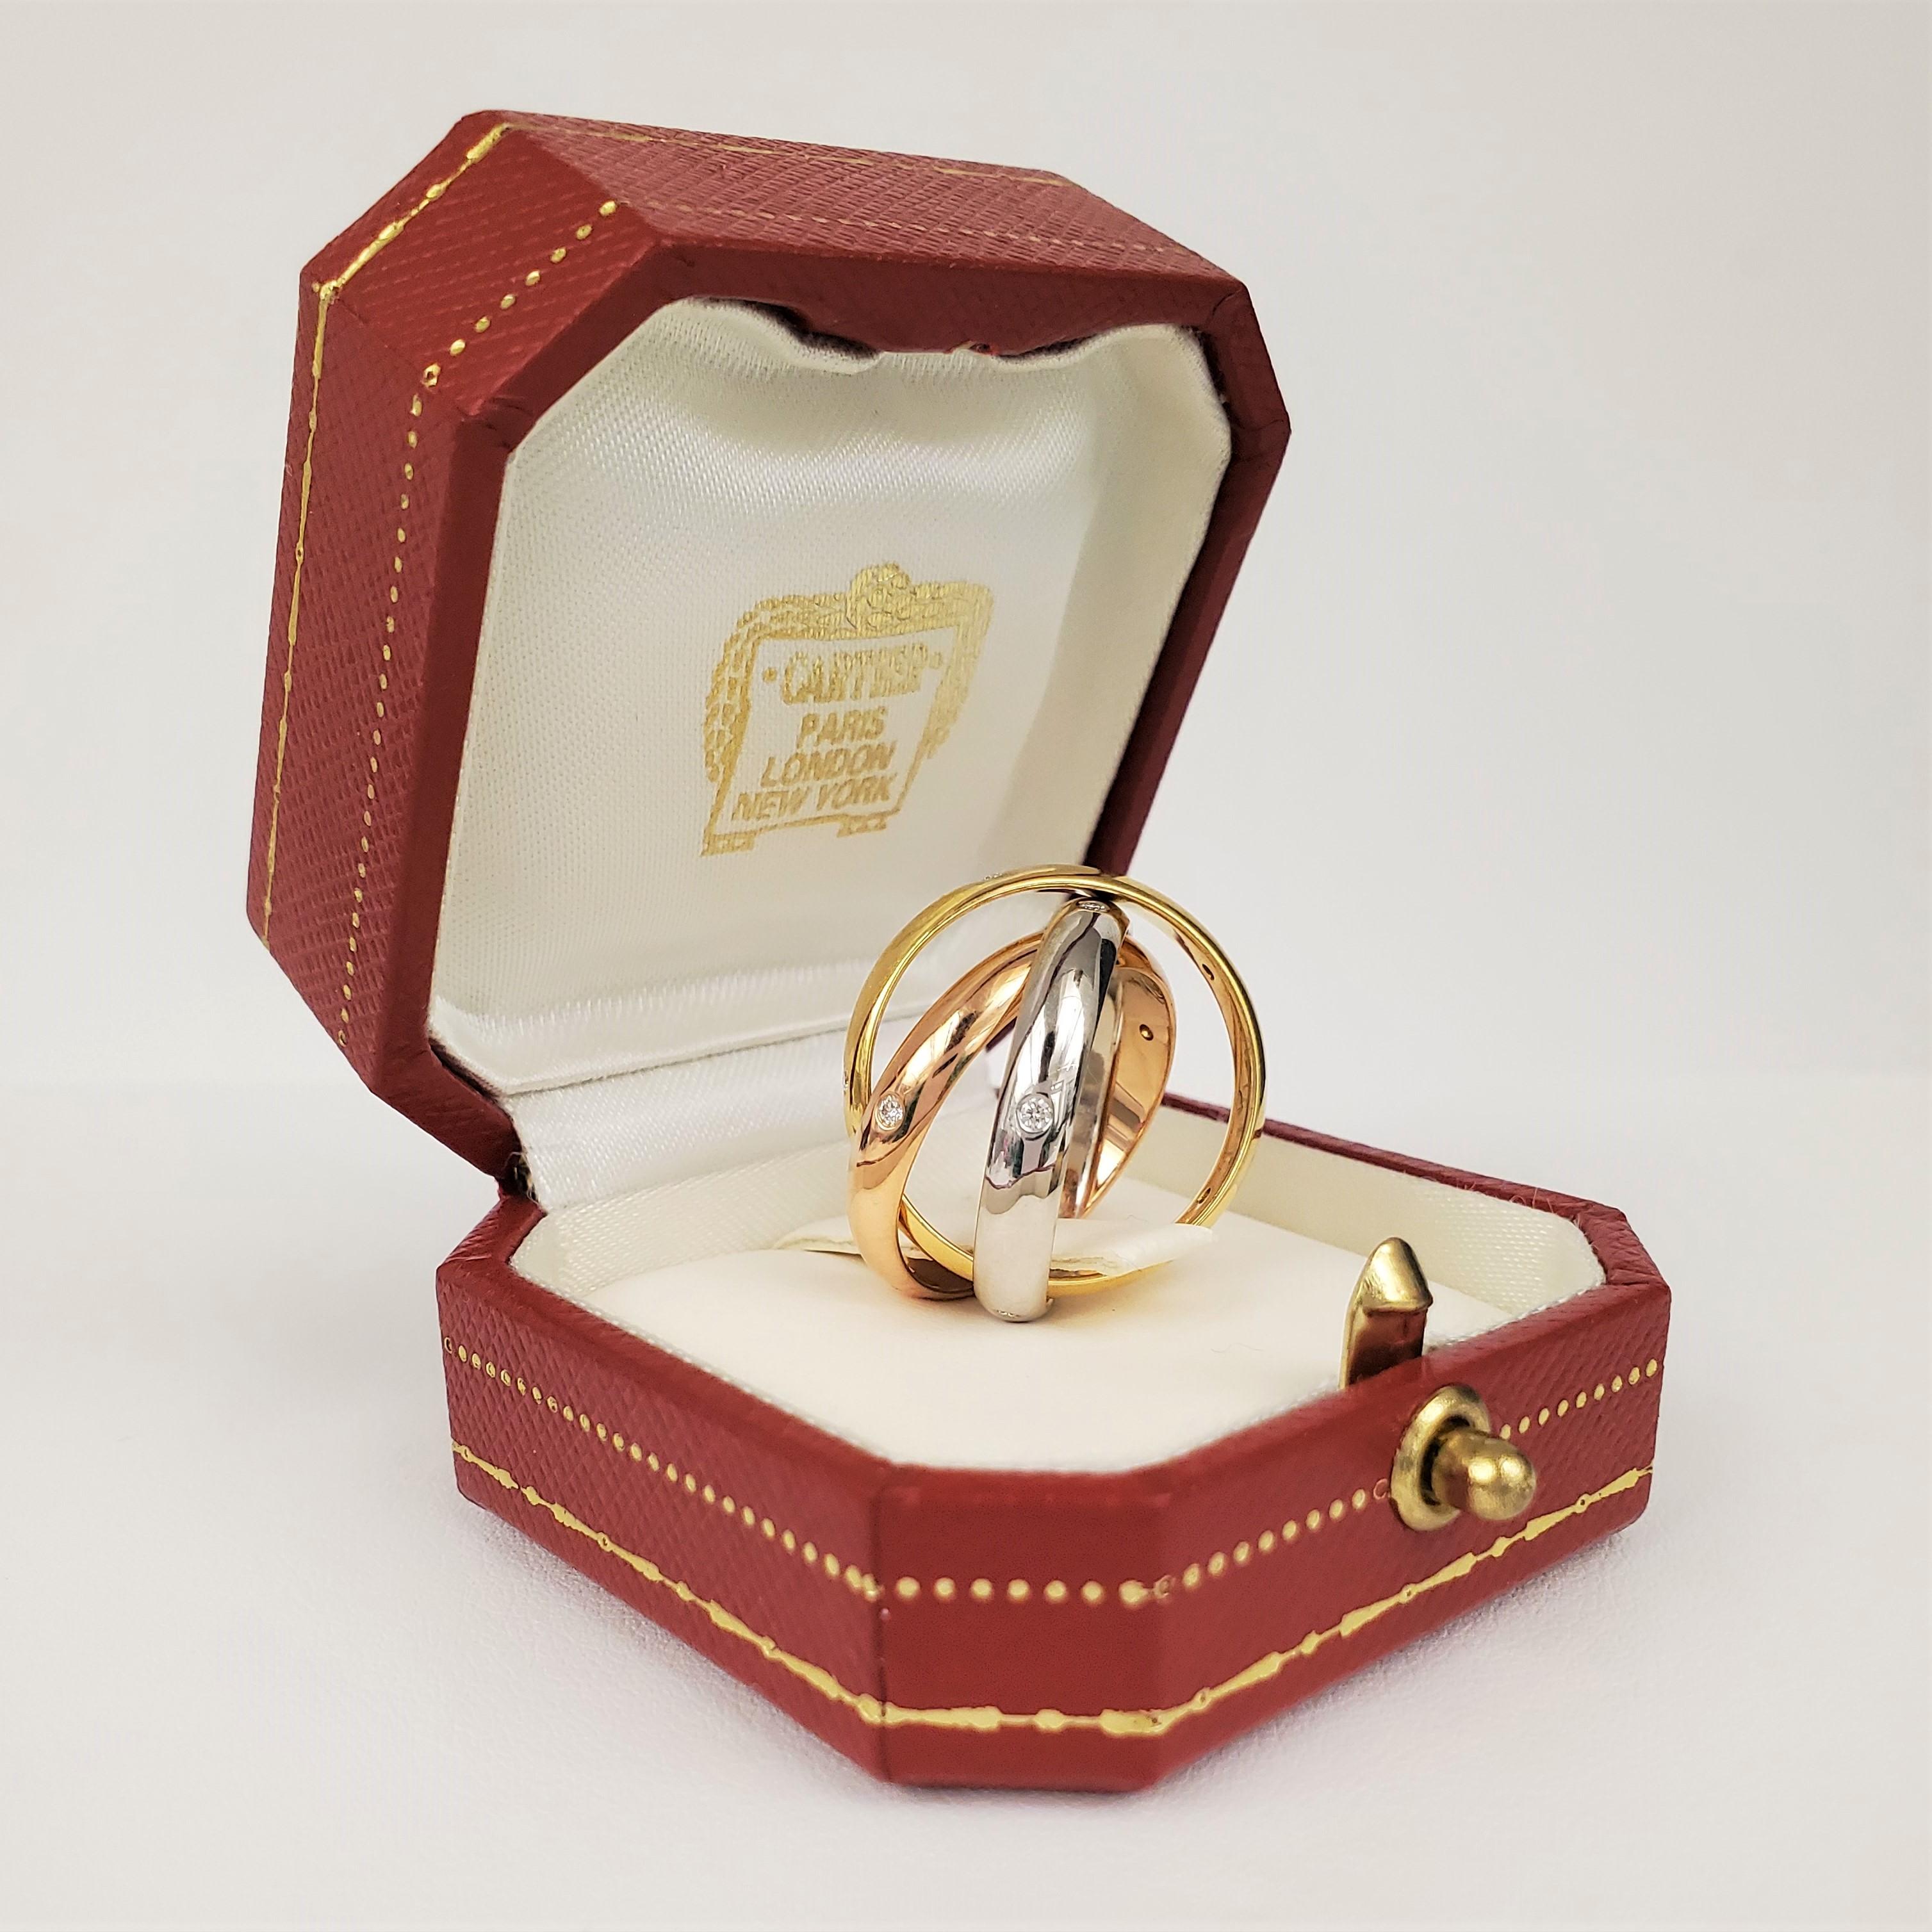 Authentic Cartier Ring crafted in 18 karat white, yellow, and pink gold.  Each band is set with 5 round brilliant cut diamonds for an estimated .15cttw. Signed Cartier, 75, 55, with serial number.  Size 55, US size 7 1/4.  Ring is presented with